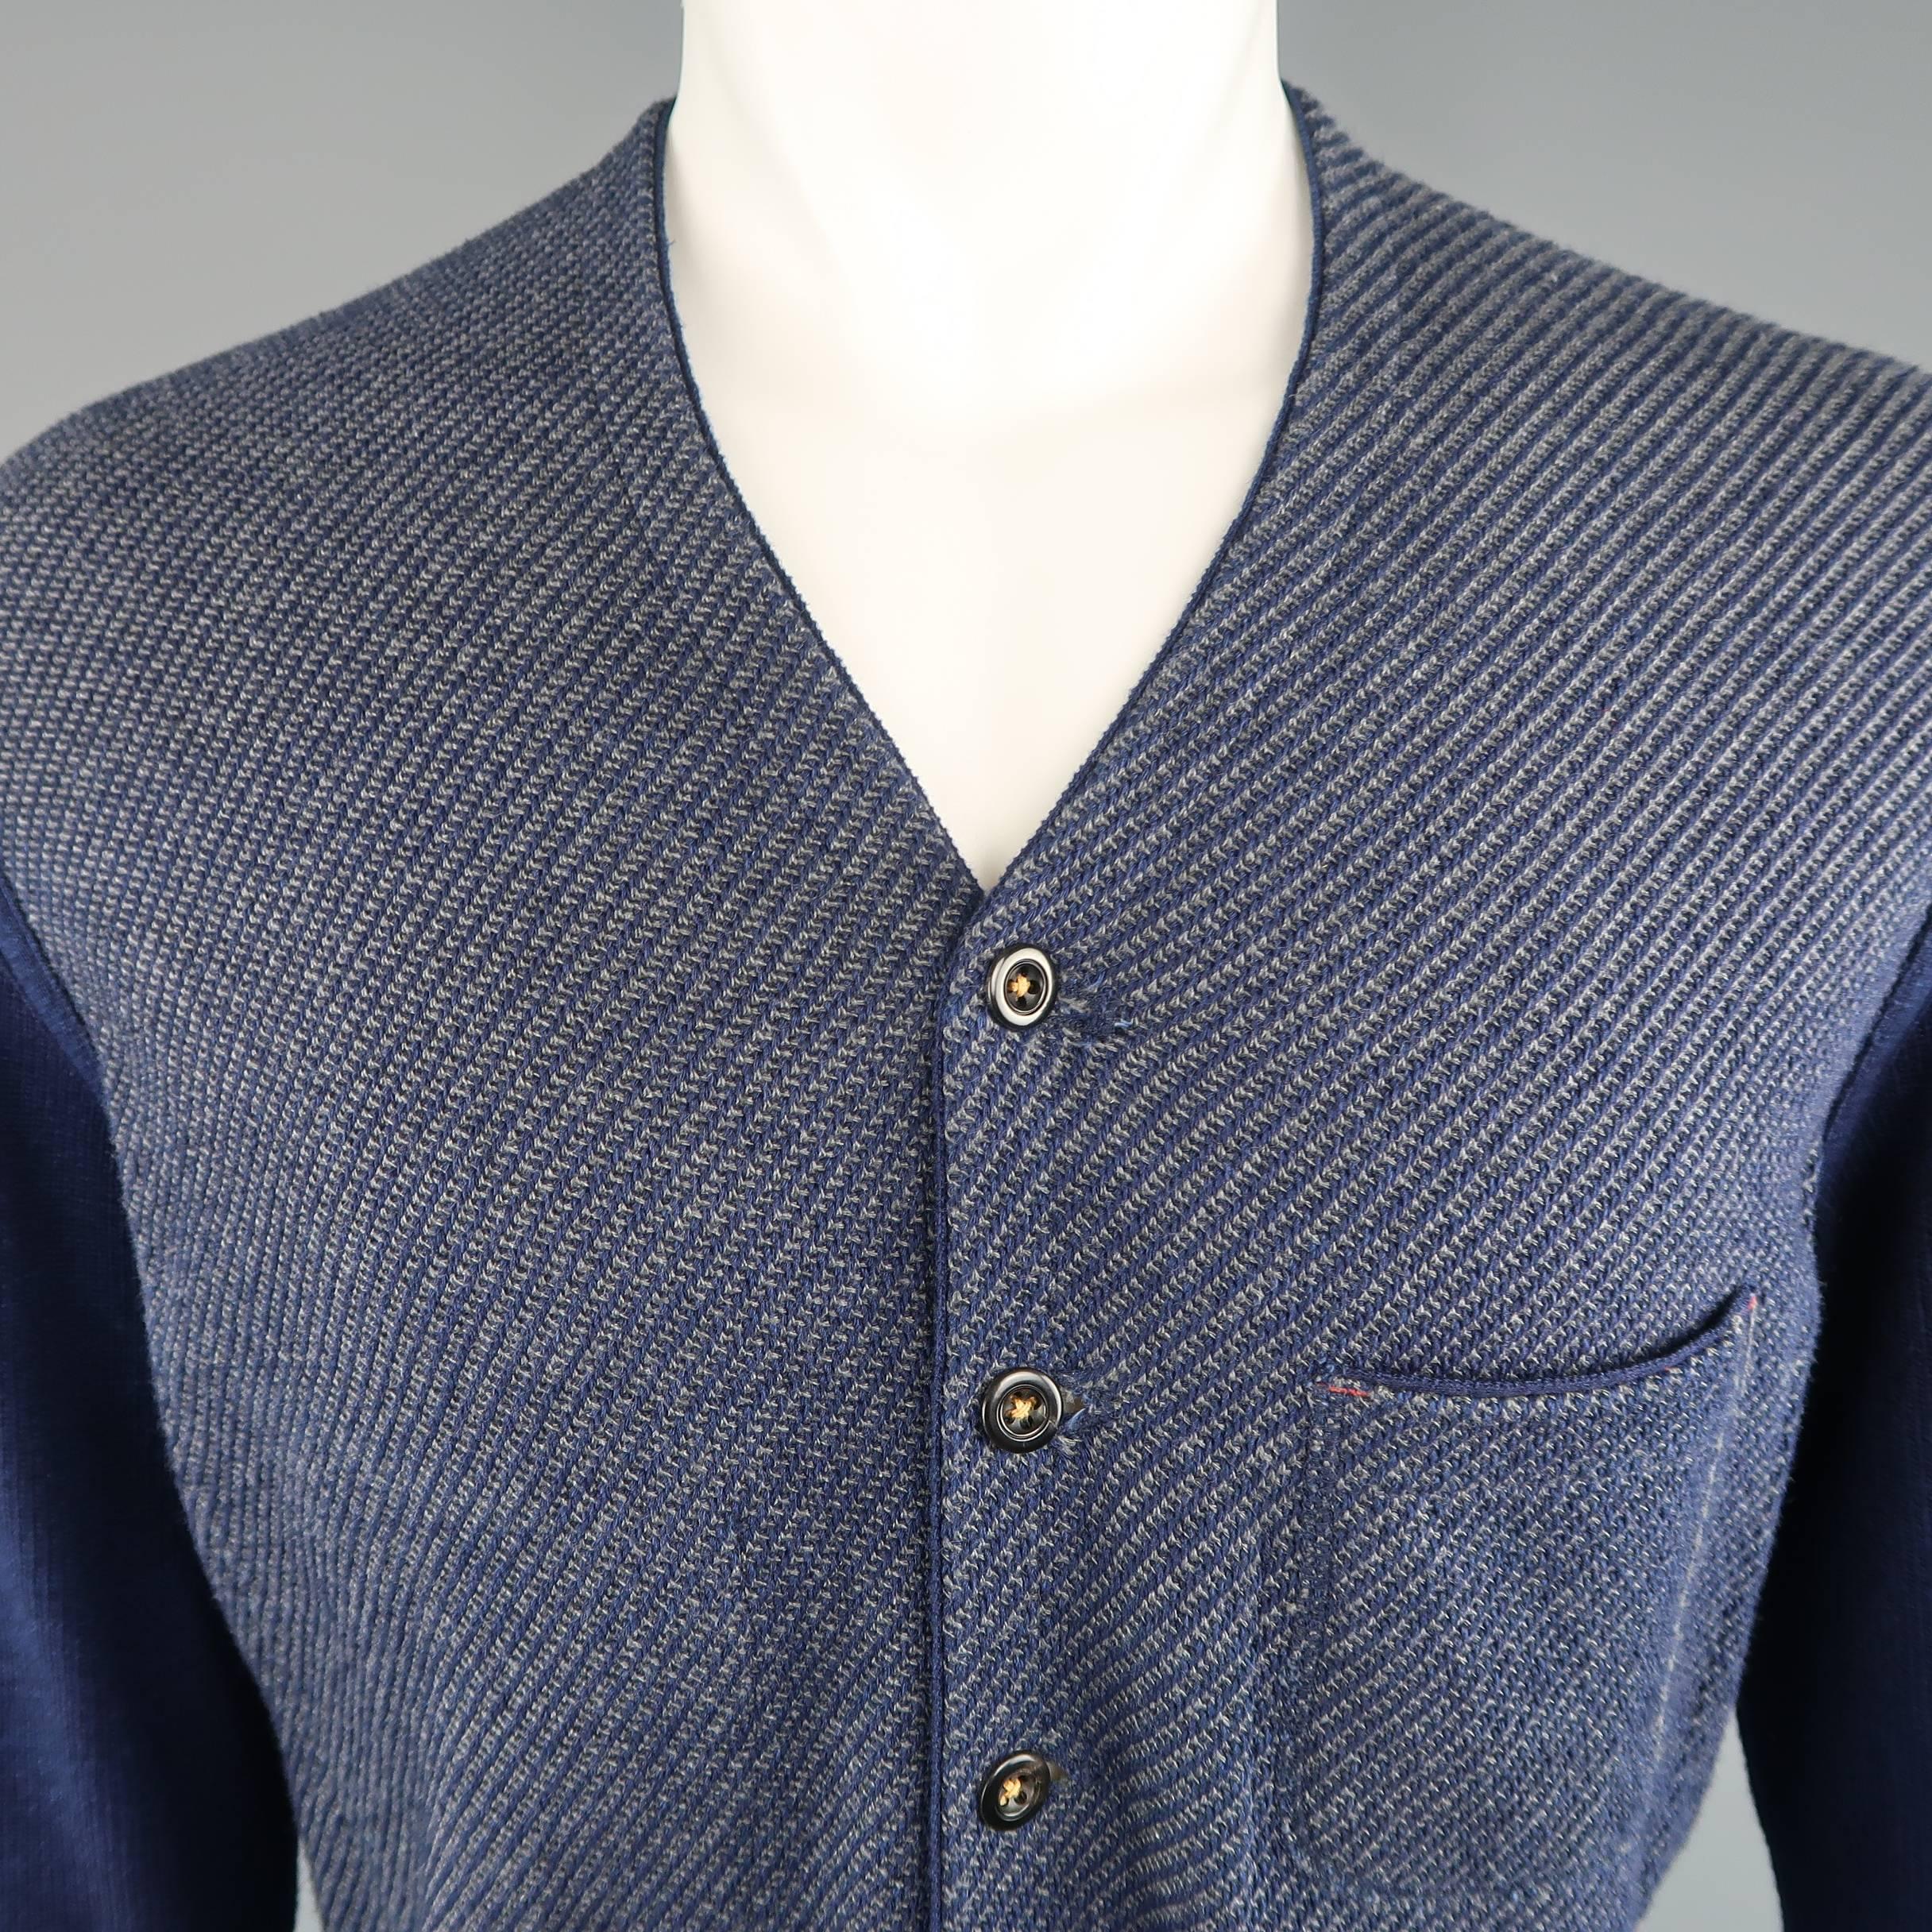 45rpm cardigan comes in navy blue cotton nit with grey textured mid section, v neck, button up front, and patch pockets. Made in Japan.
 
Excellent Pre-Owned Condition.
Marked: JP 5
 
Measurements:
 
Shoulder:18 in.
Chest: 46 in.
Sleeve: 25